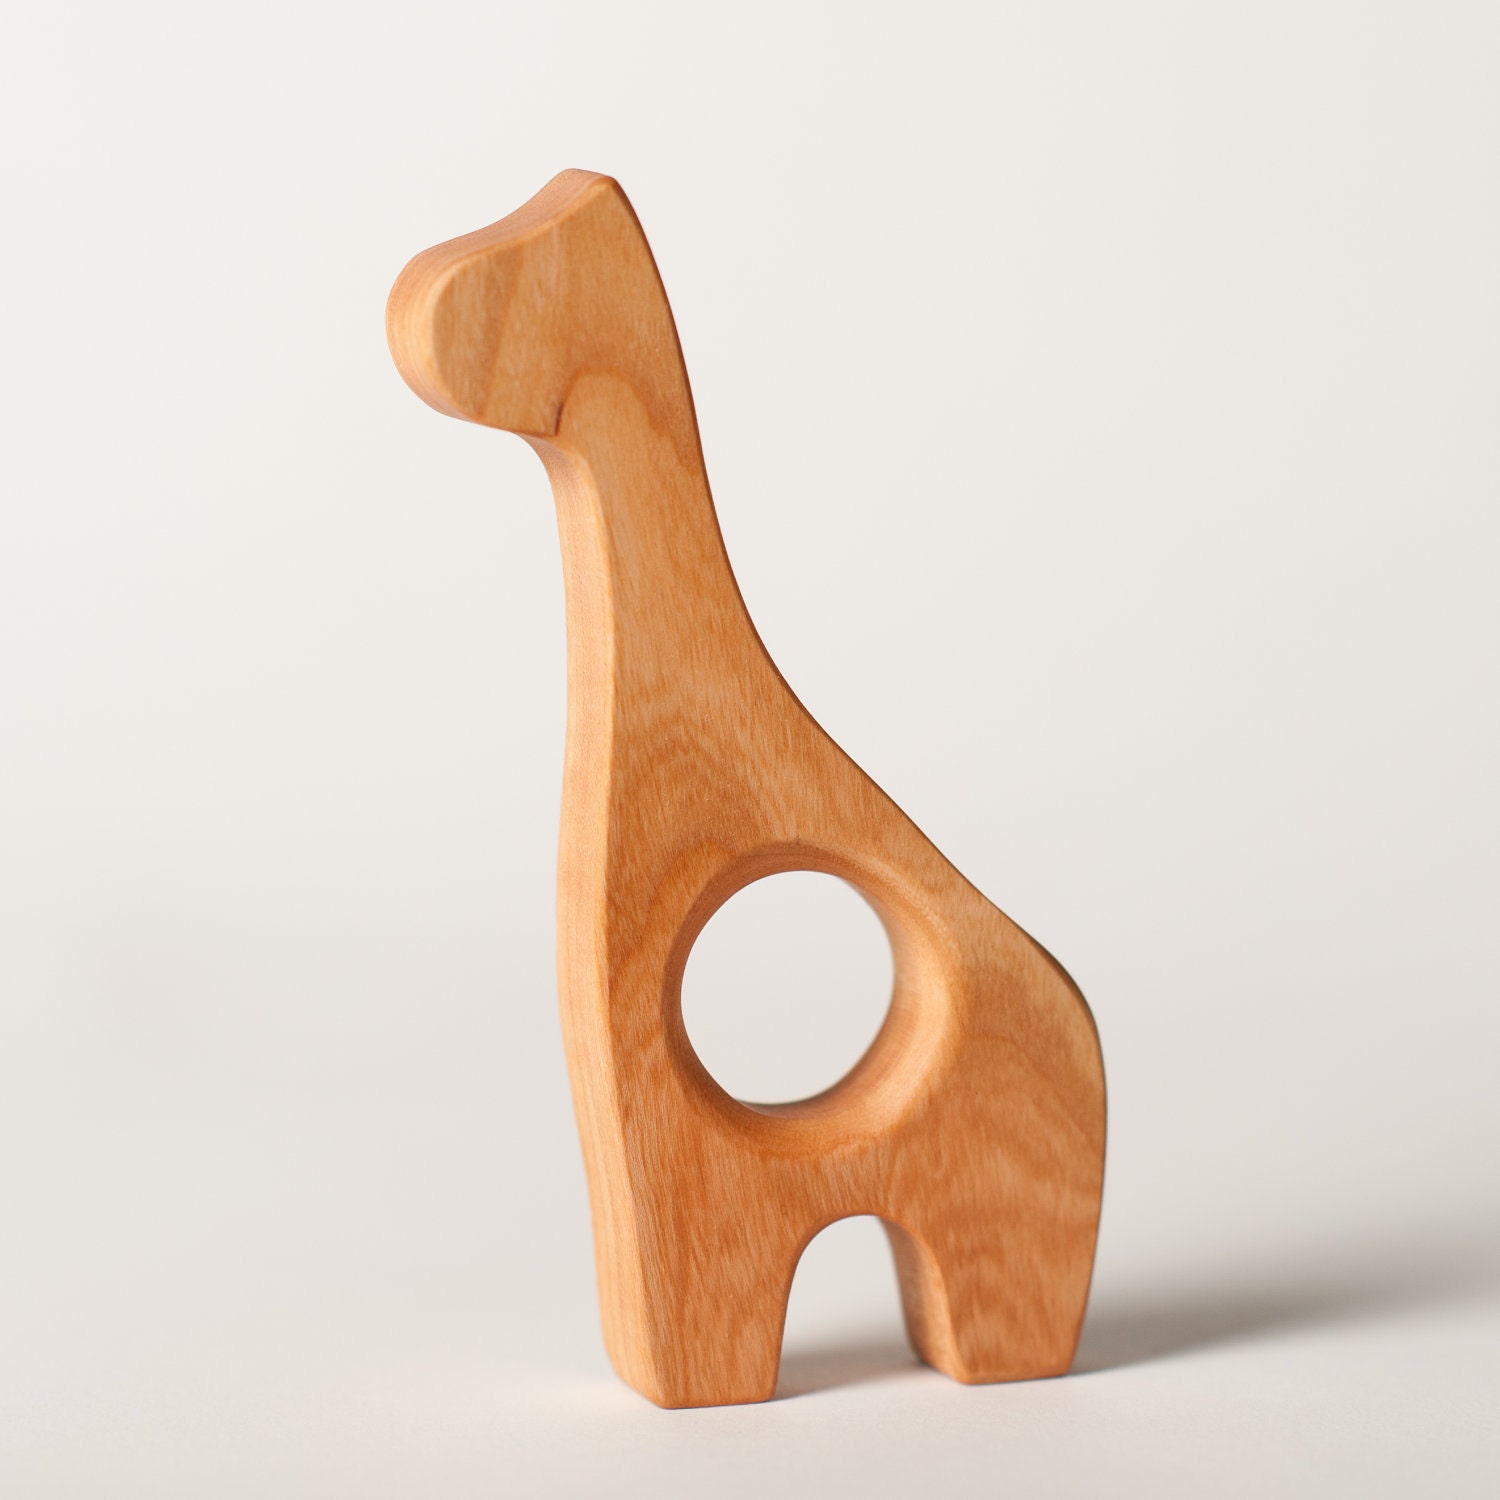 Wood Teether Giraffe wooden toy natural baby toy